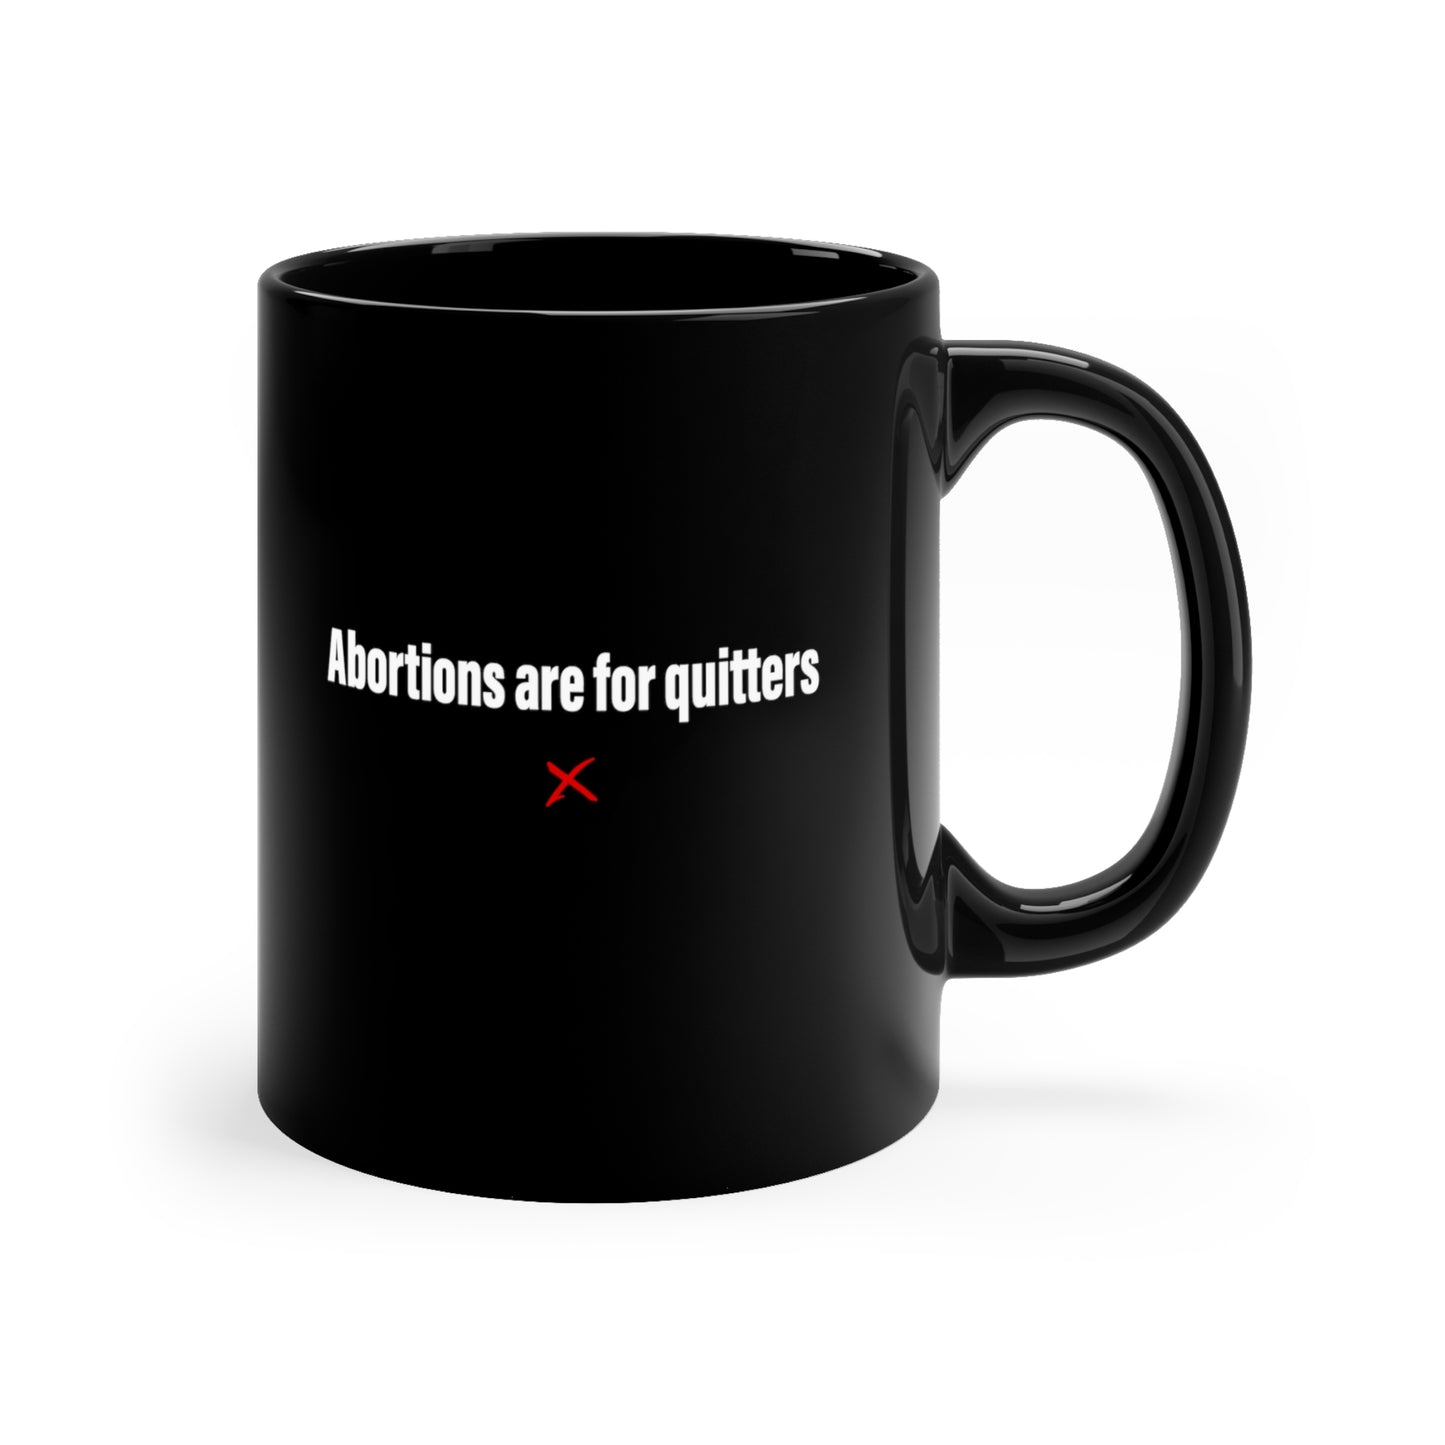 Abortions are for quitters - Mug